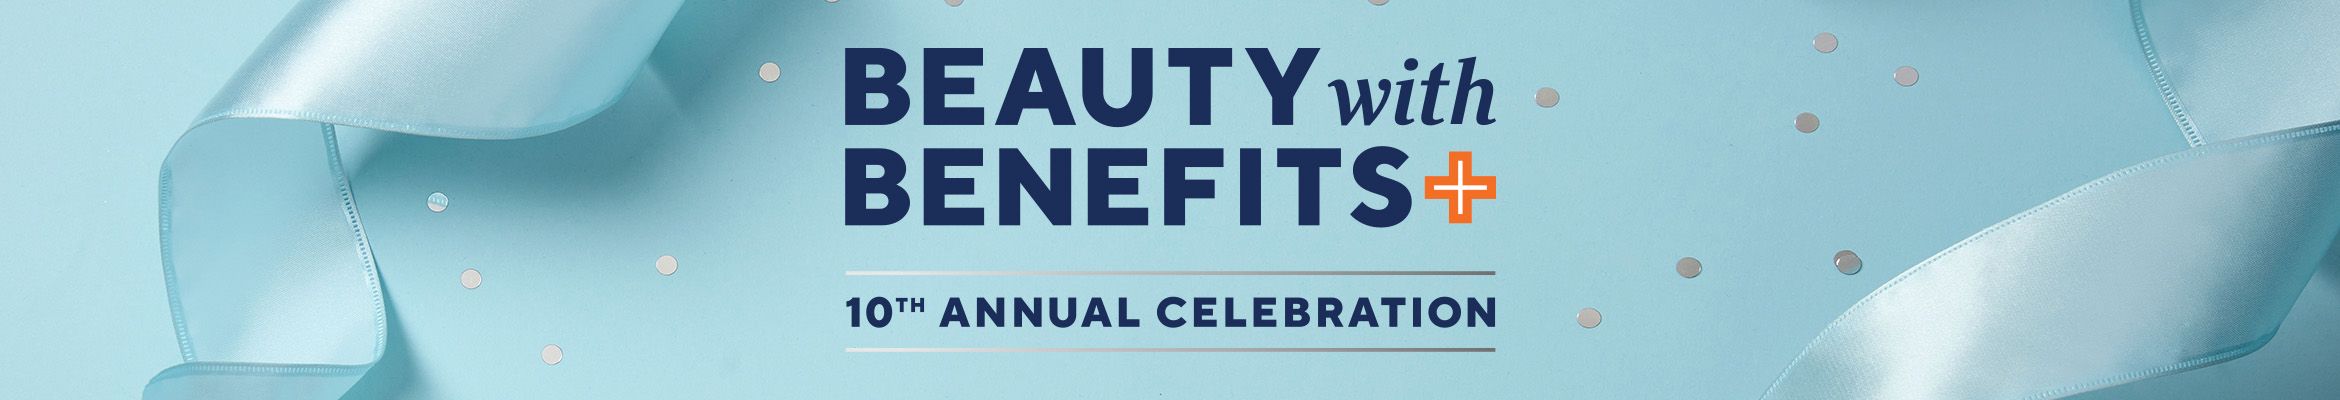 Beauty with Benefits—10th Annual Celebration 